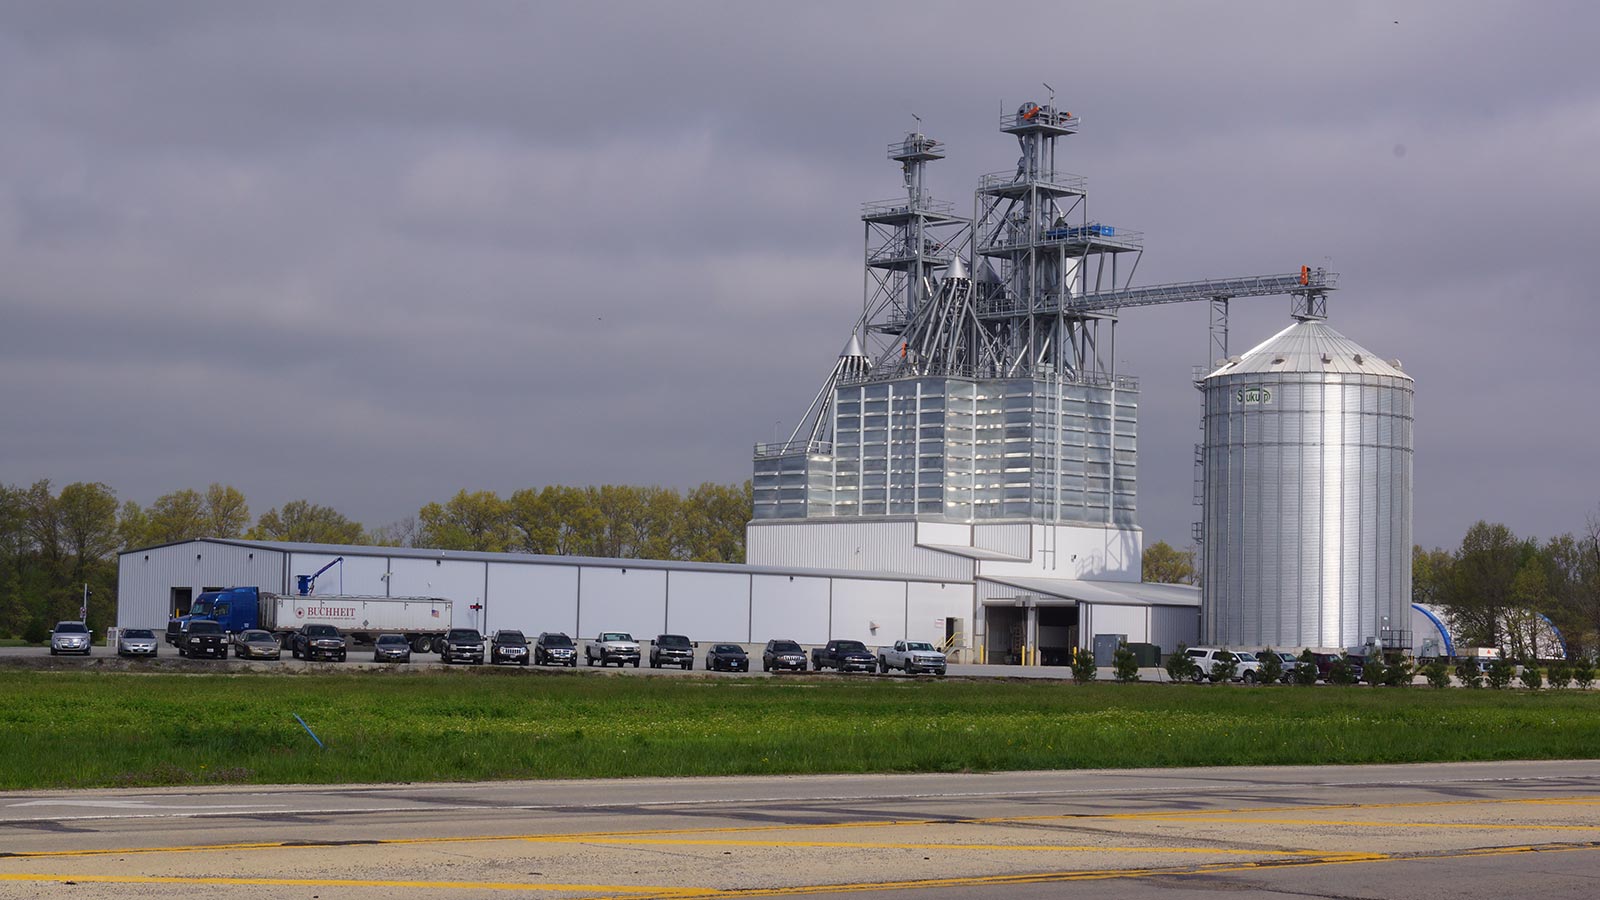 view of a feed mill from the highway